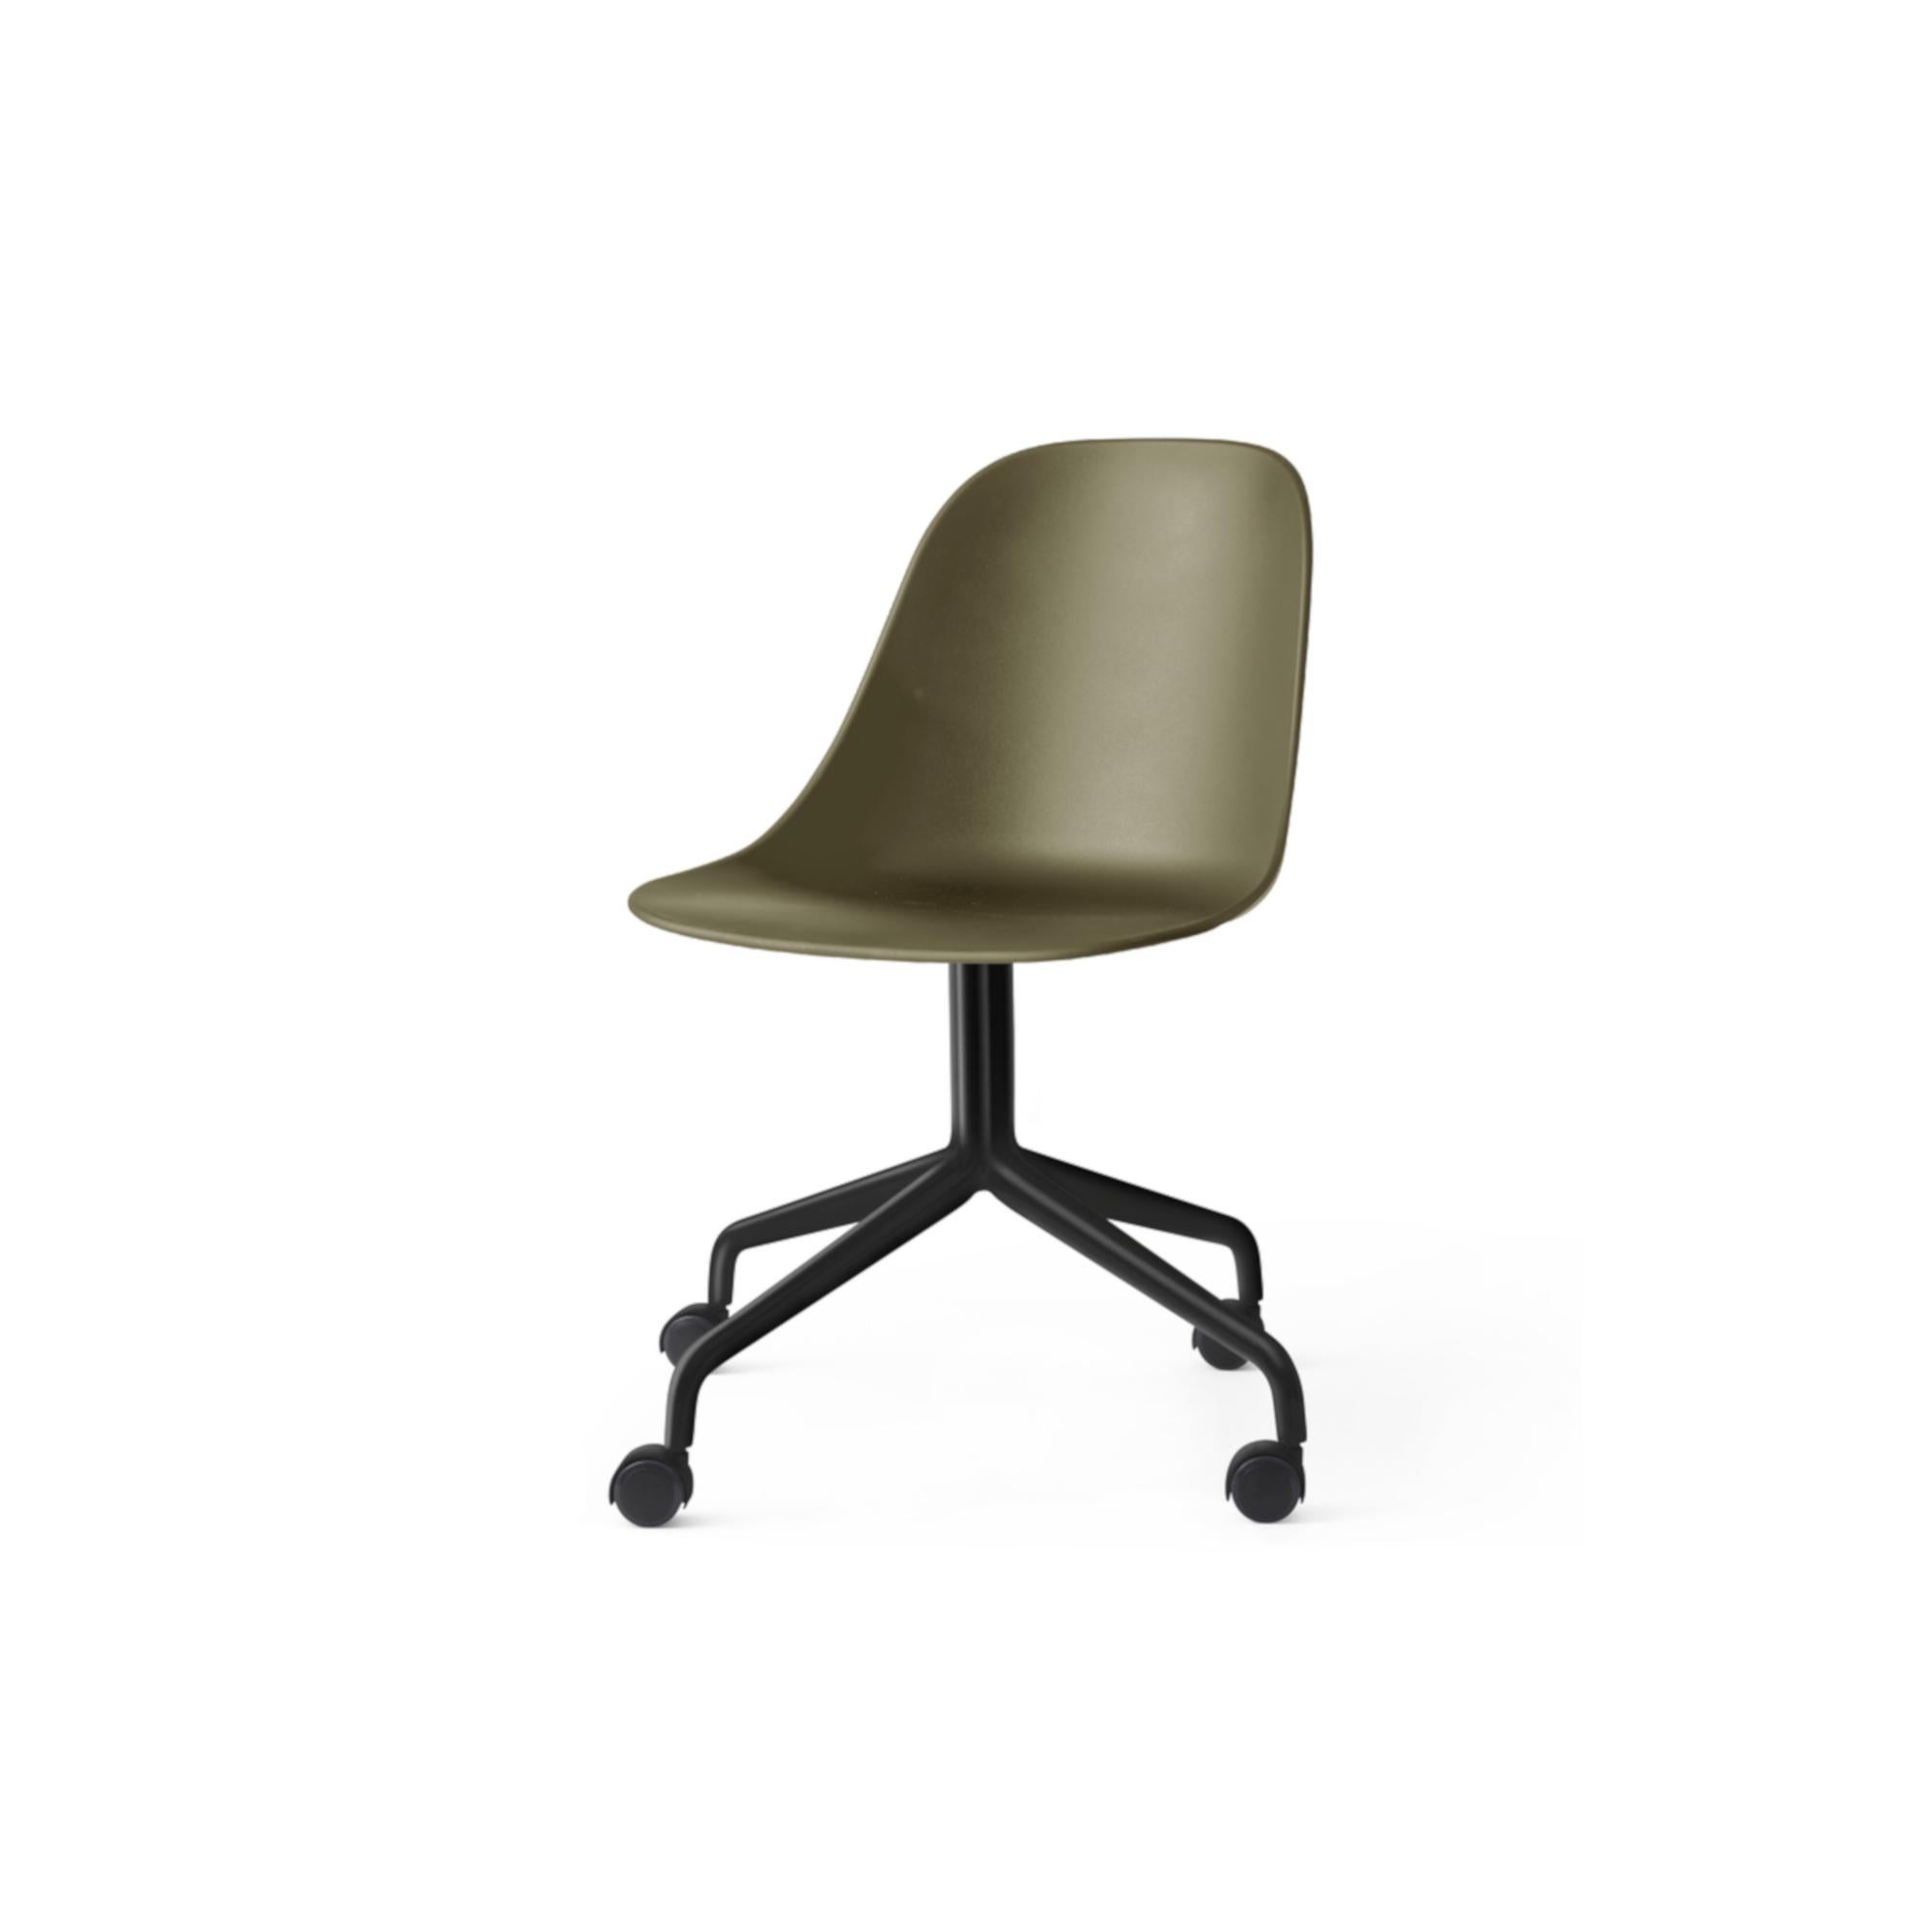 Scandinavian Modern Harbour Side Chair, Black Steel Swivel Base with Caster, Olive Shell For Sale